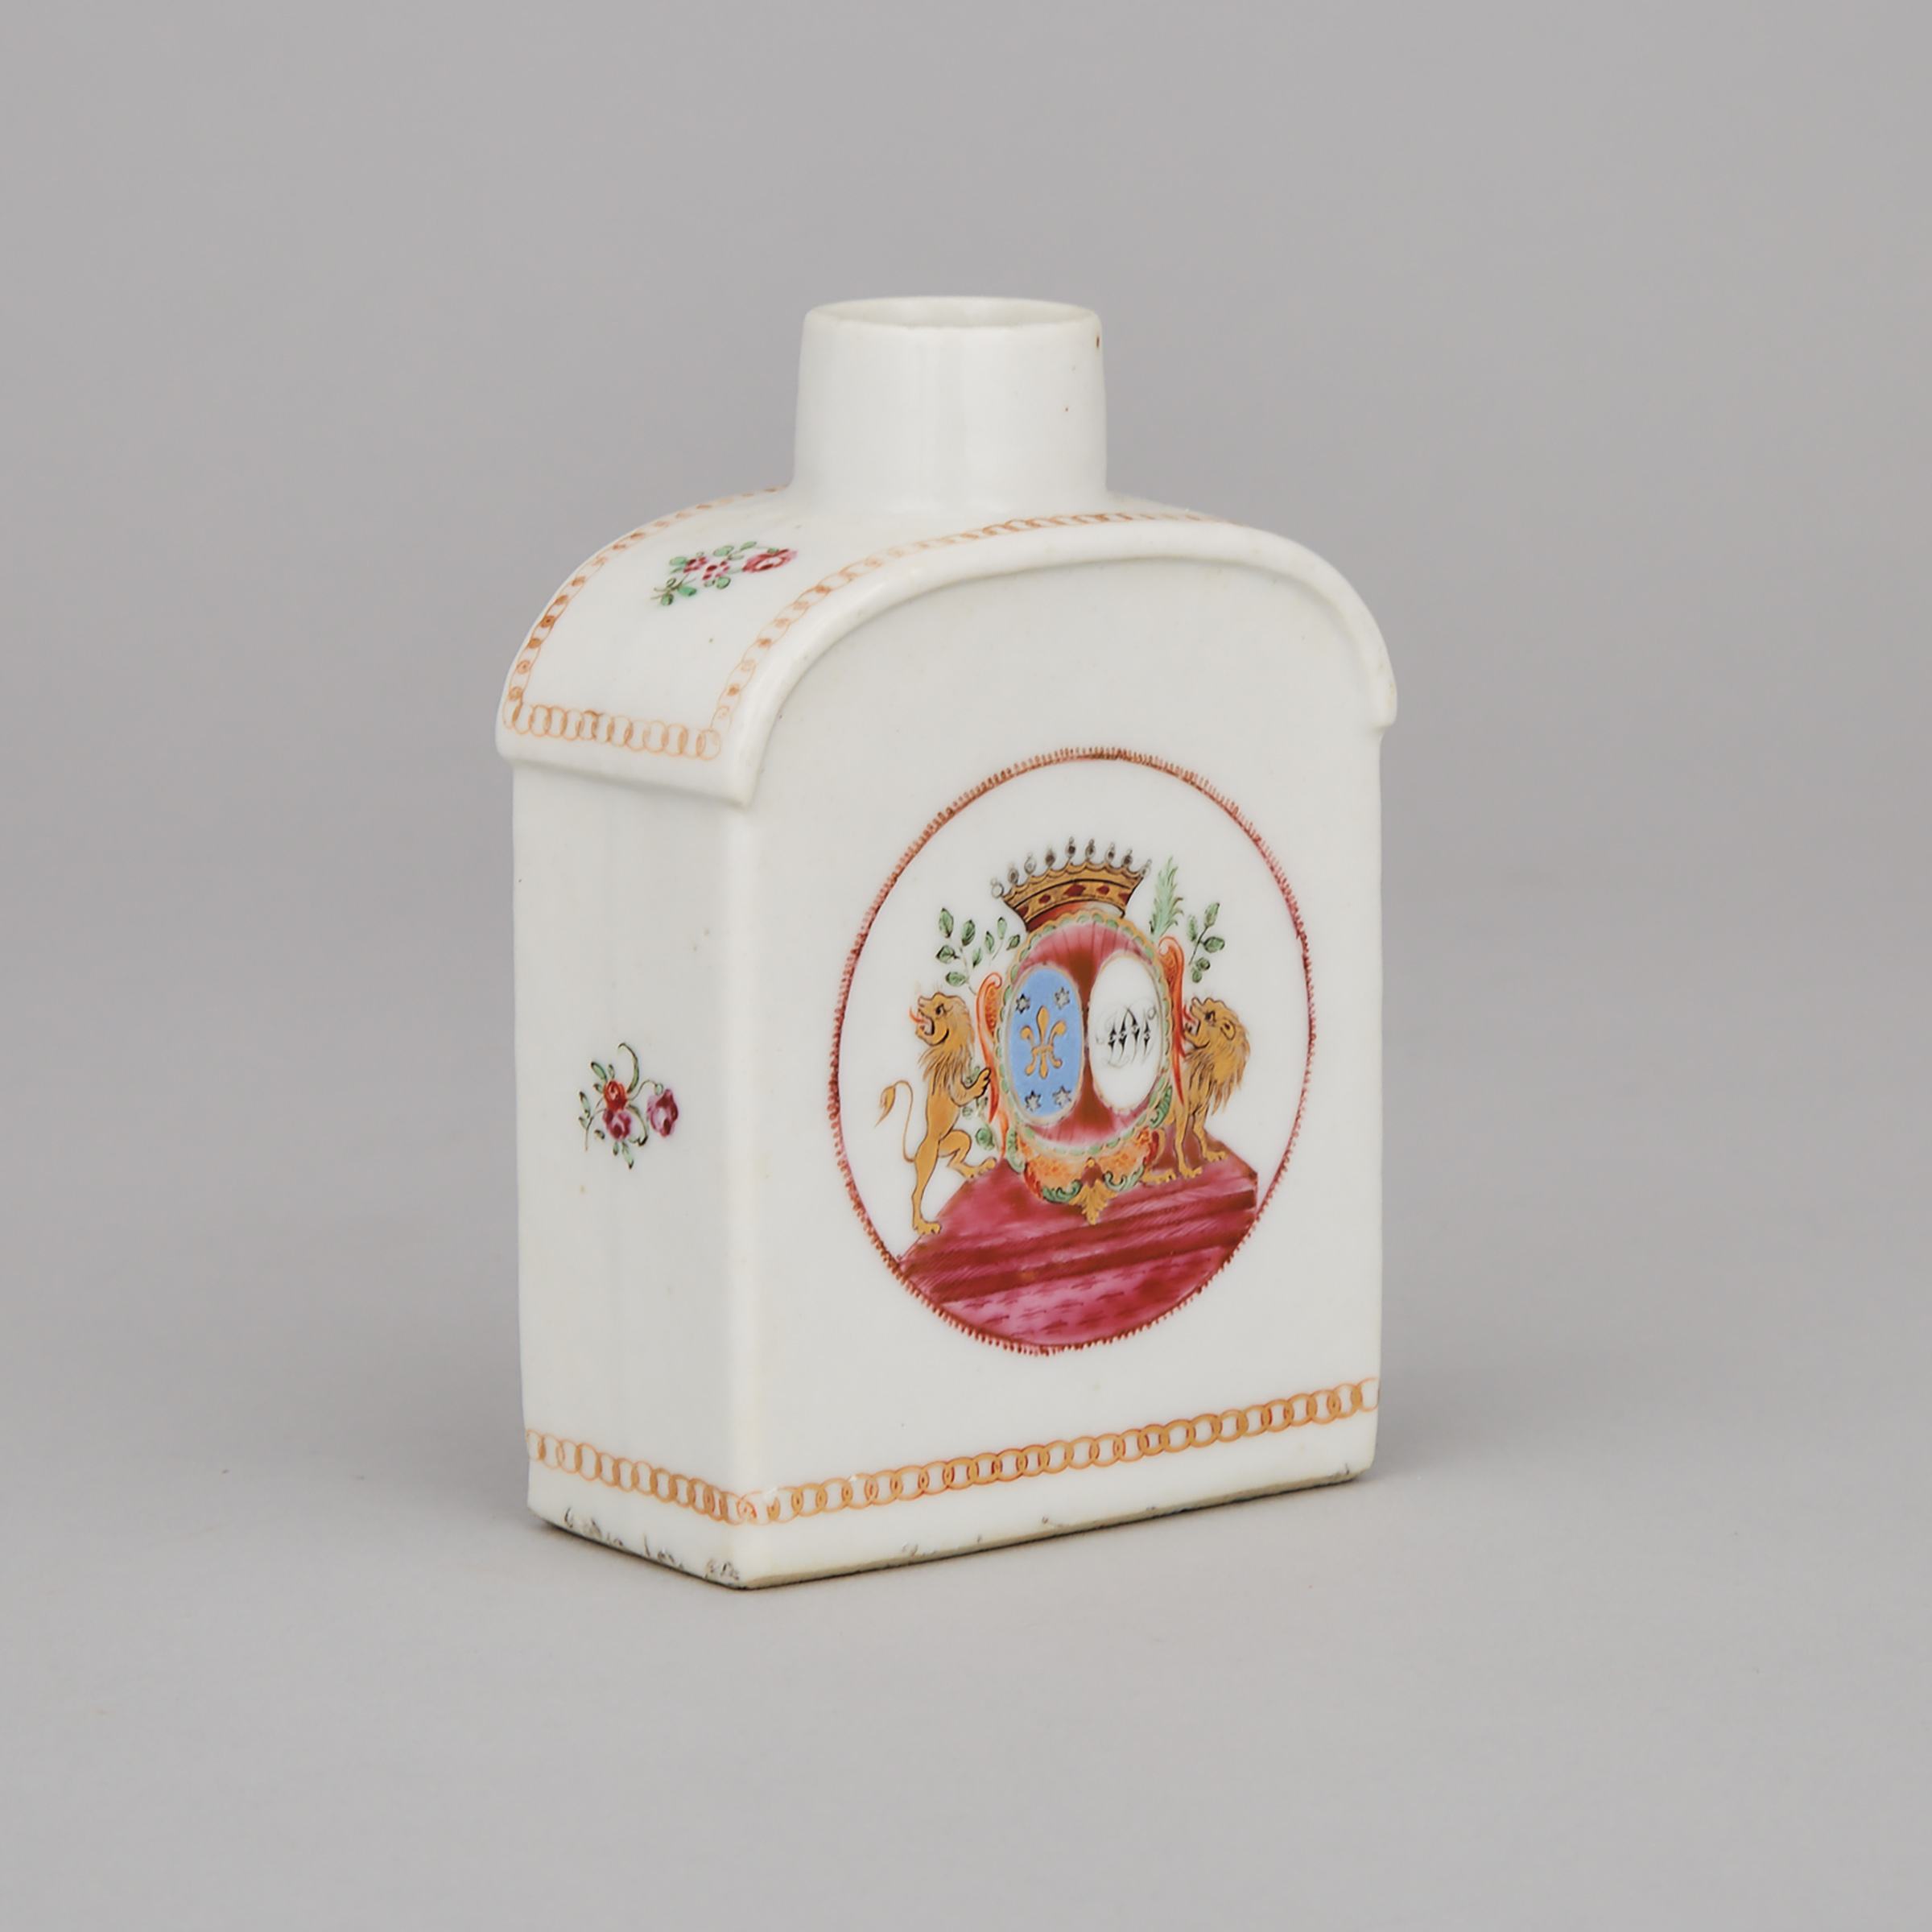 Chinese Export Porcelain Armorial Tea Canister, late 18th century